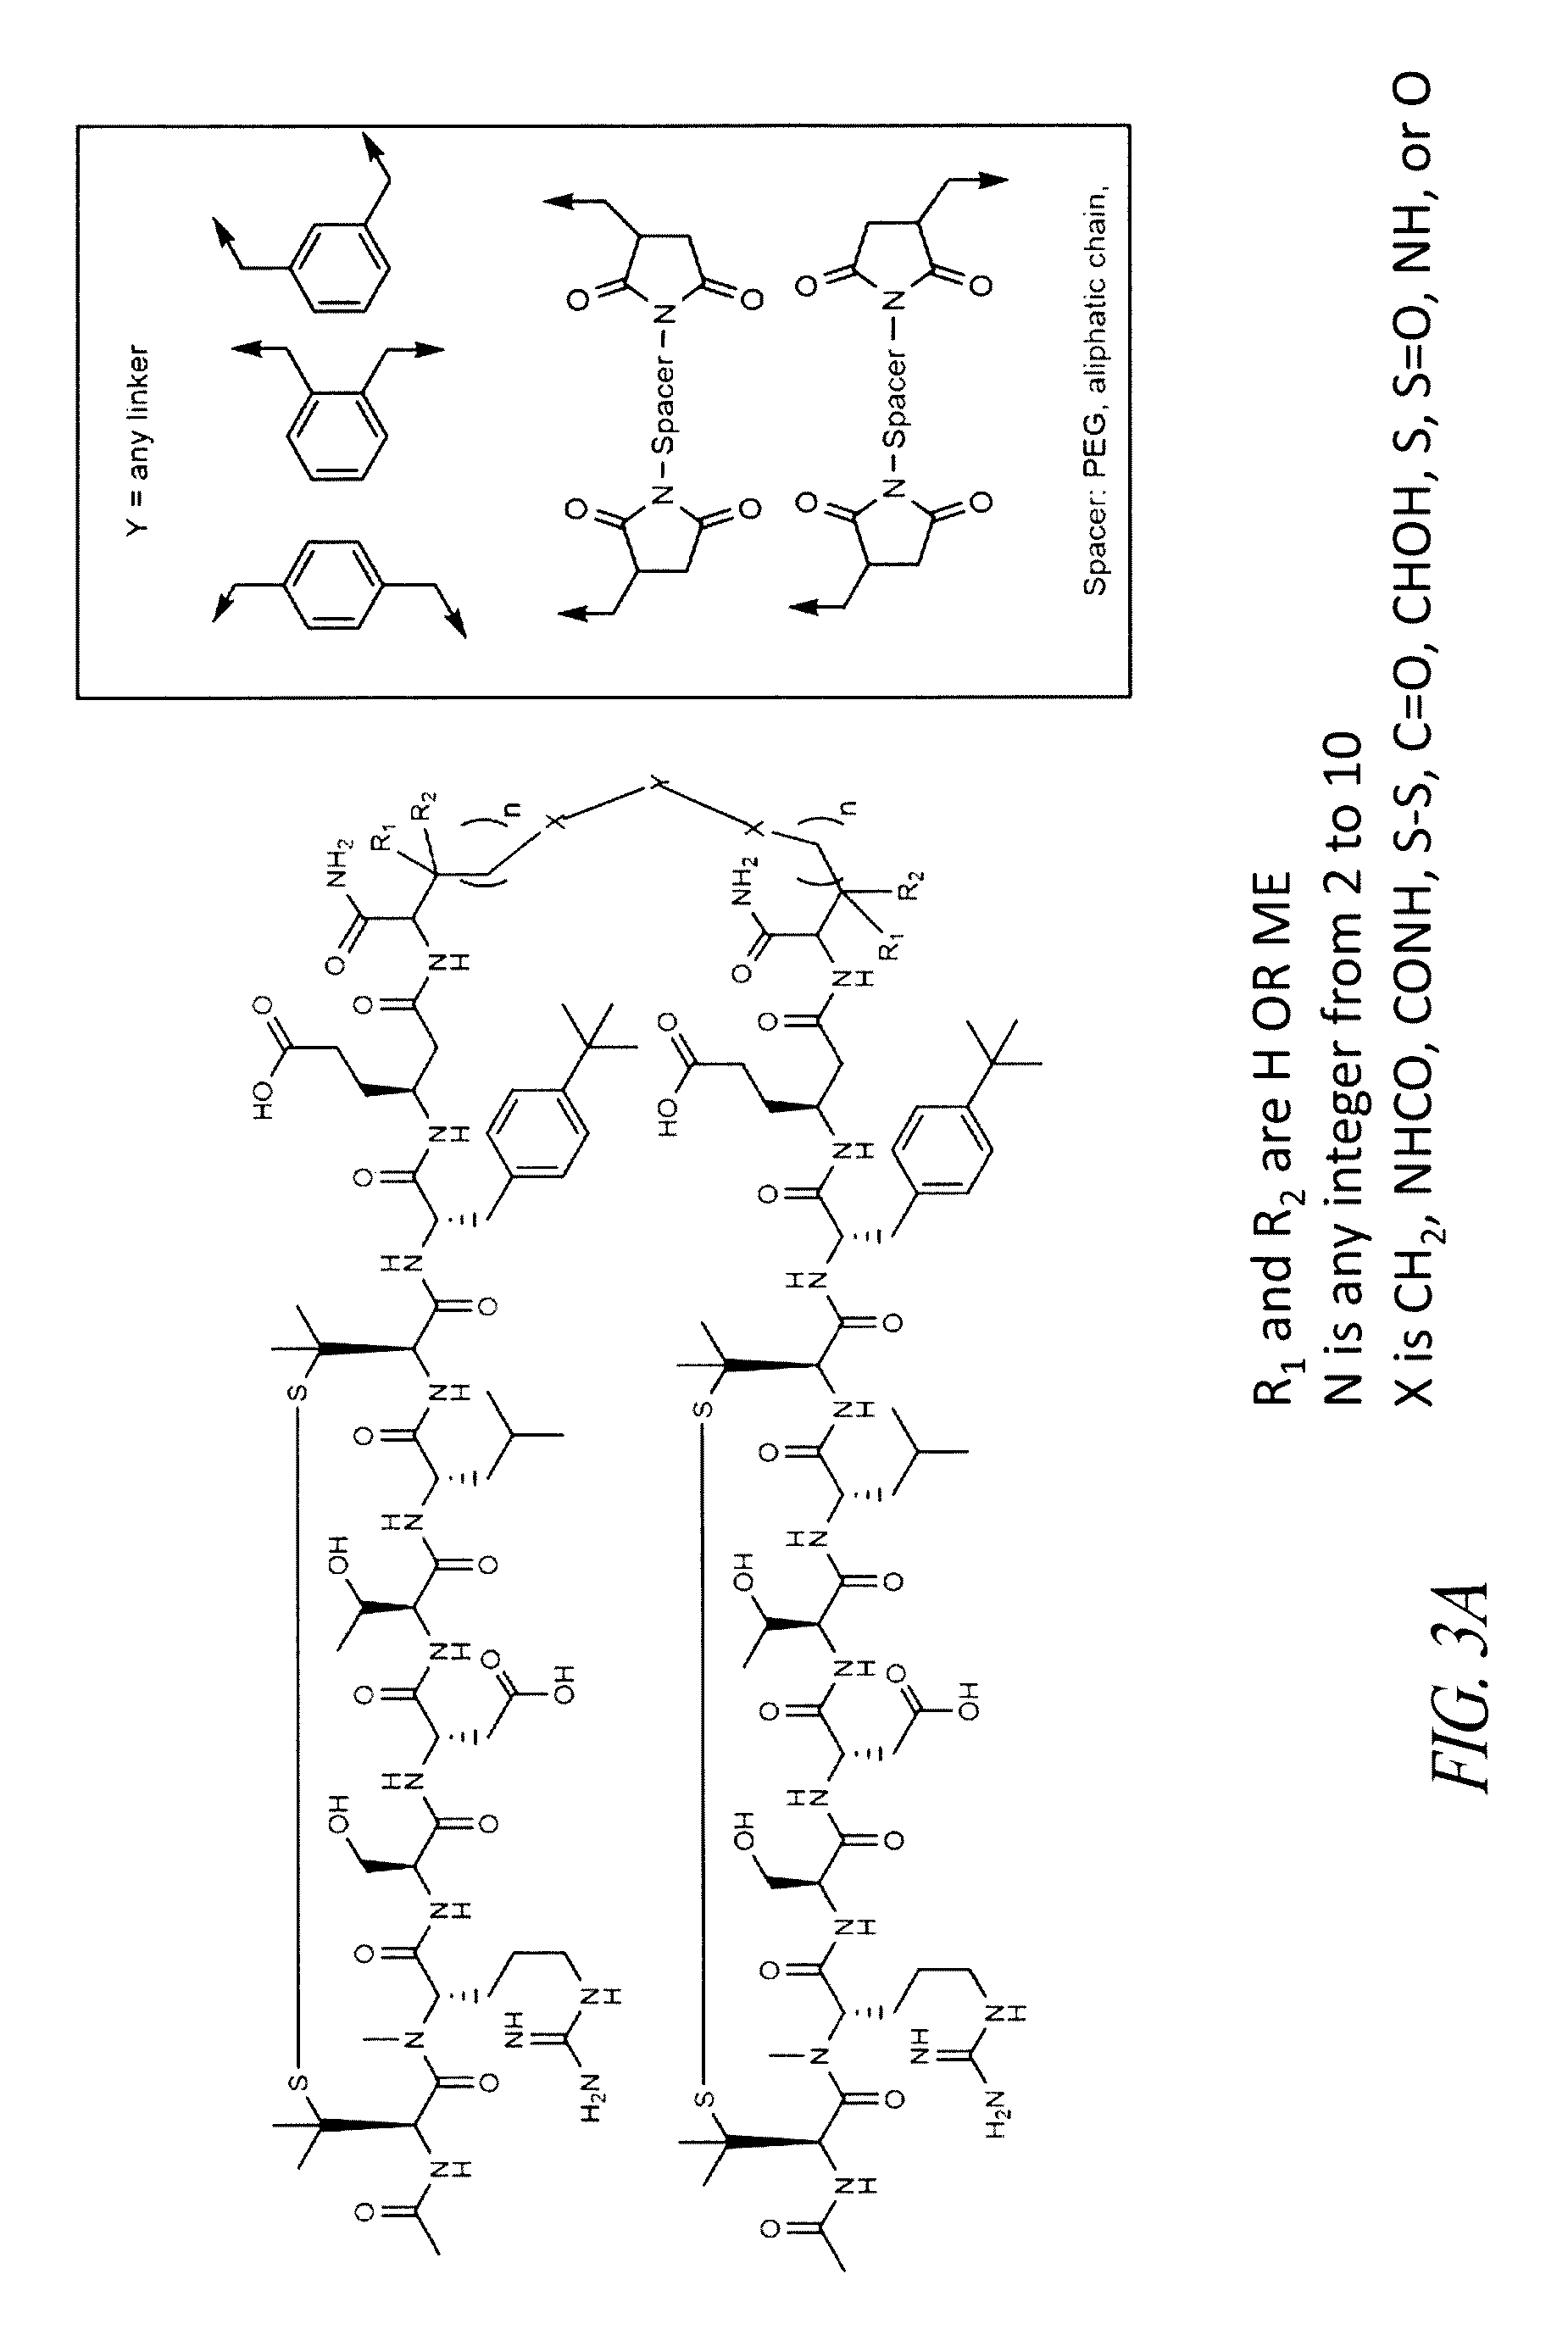 A4B7 peptide monomer and dimer antagonists